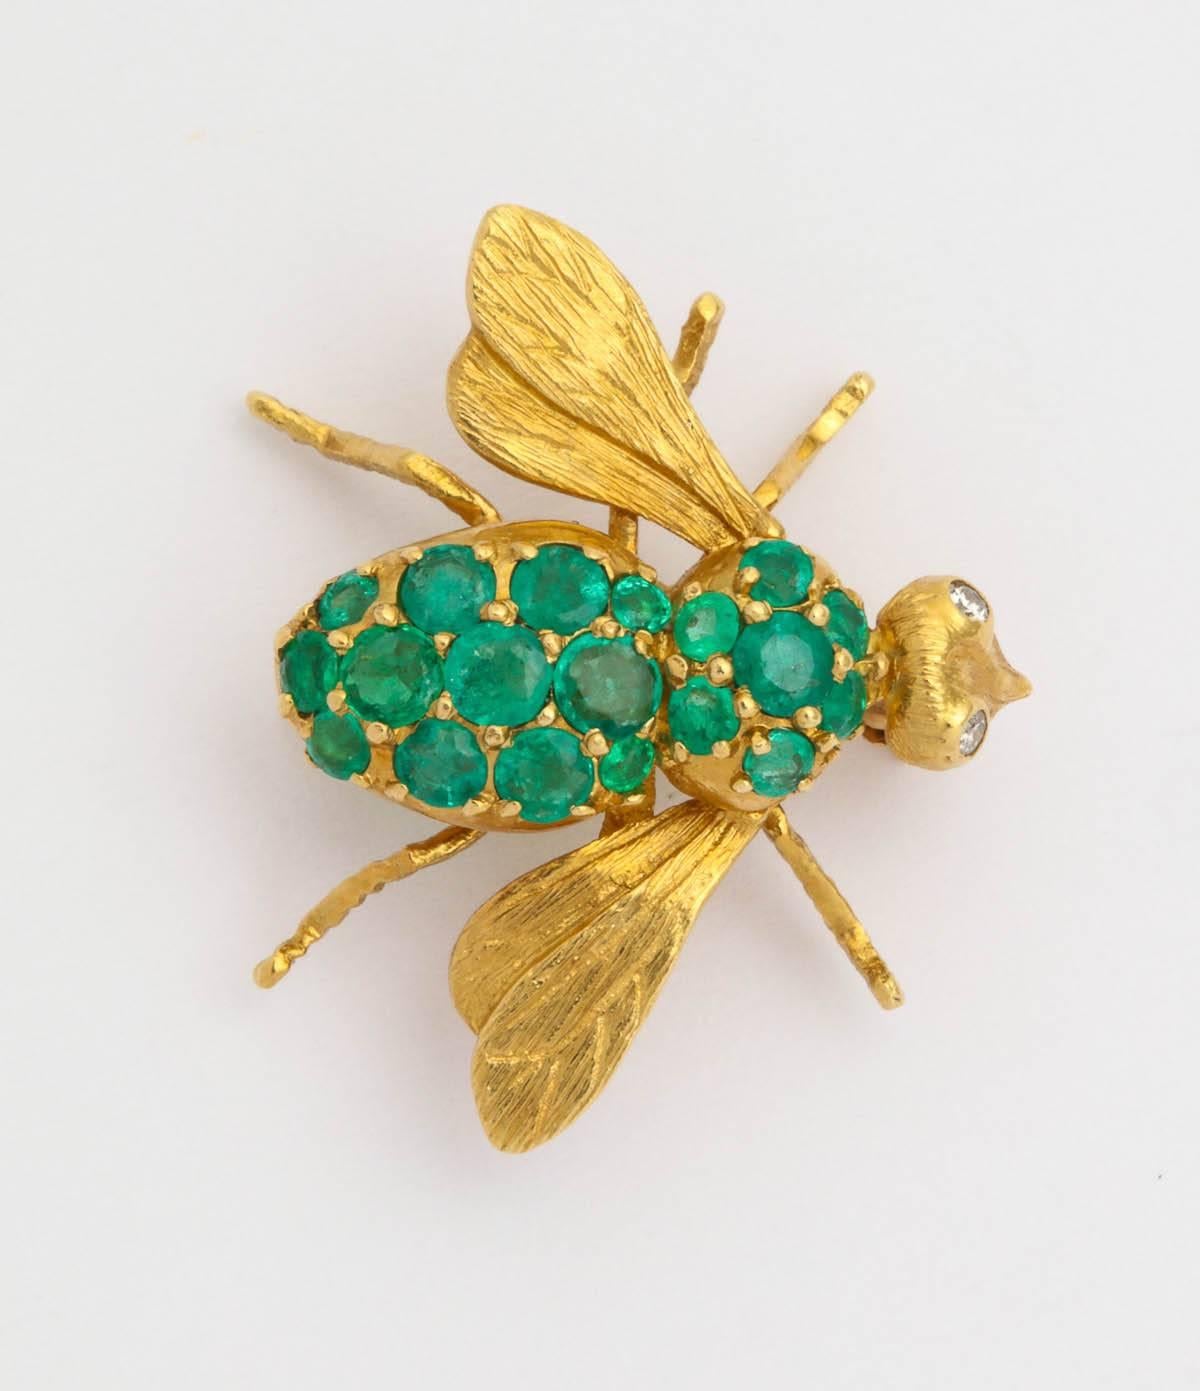 18k yellow gold and Emerald baby bee brooch 3/4 inch long  wing span 15/16 of an inch set with 18 emeralds 1.00 carat
